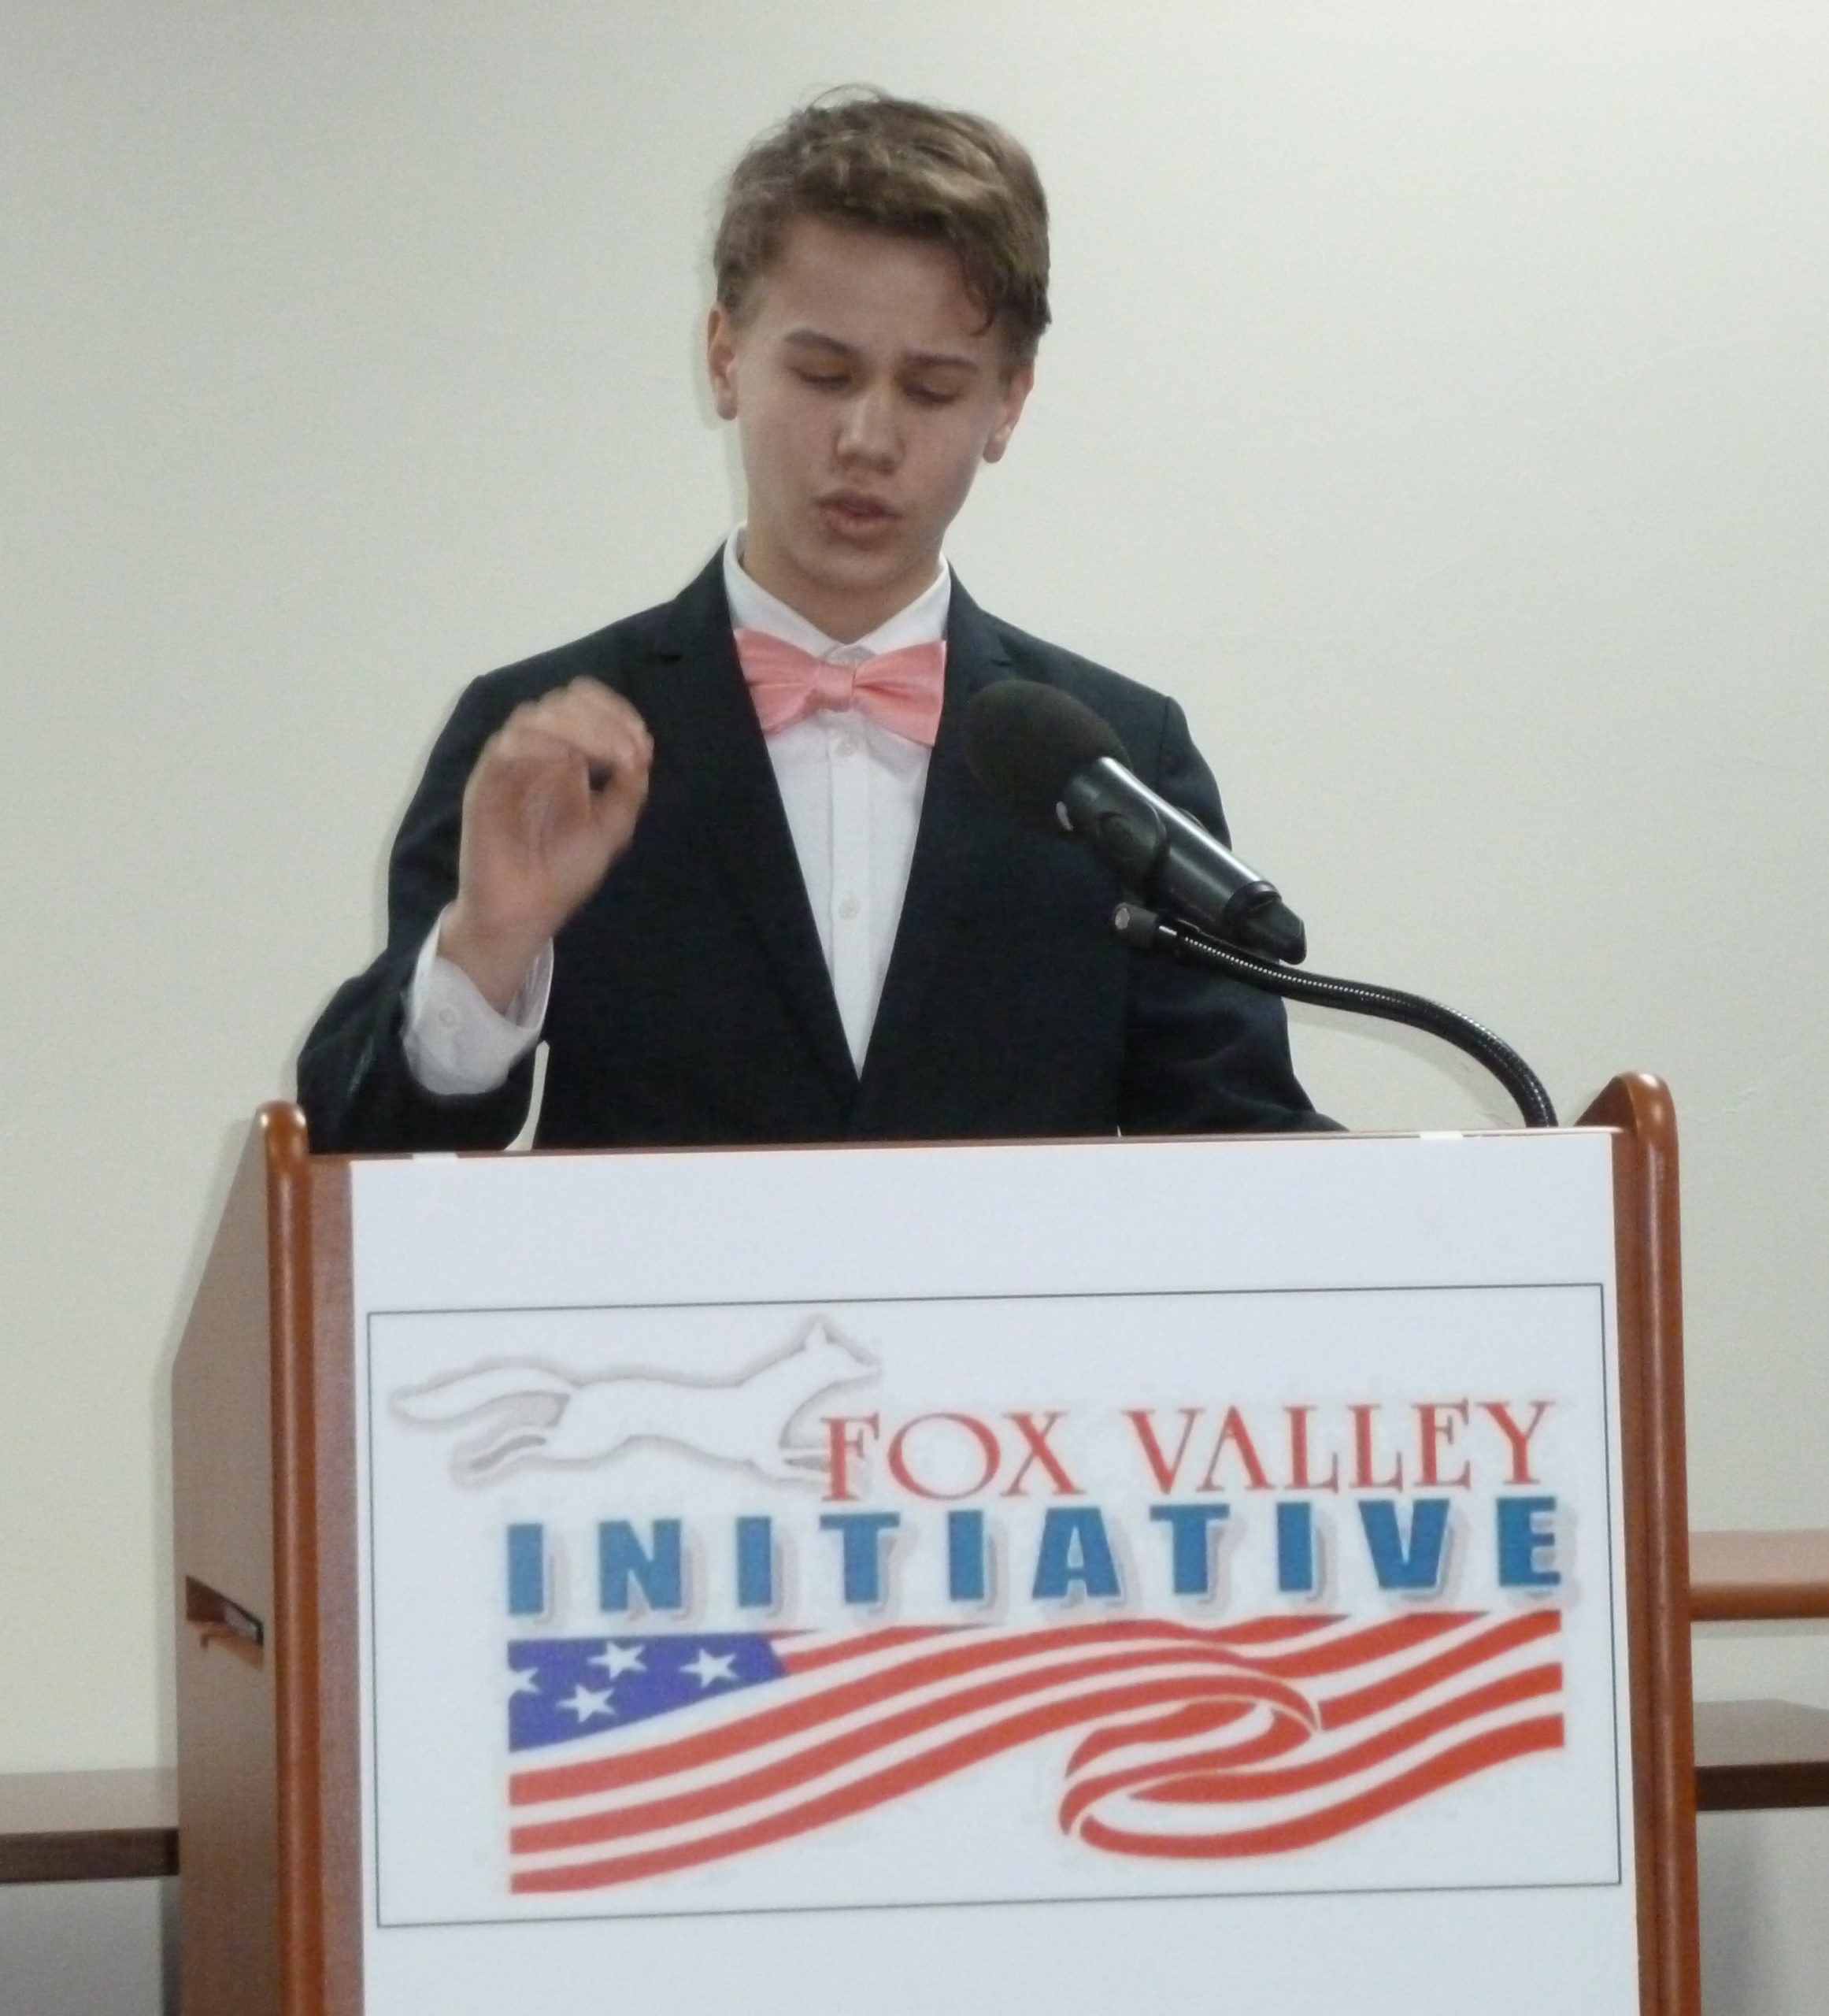 Ethan, a candidate for the LEAD Wisconsin scholarship, discussed America as a bastion of freedom.